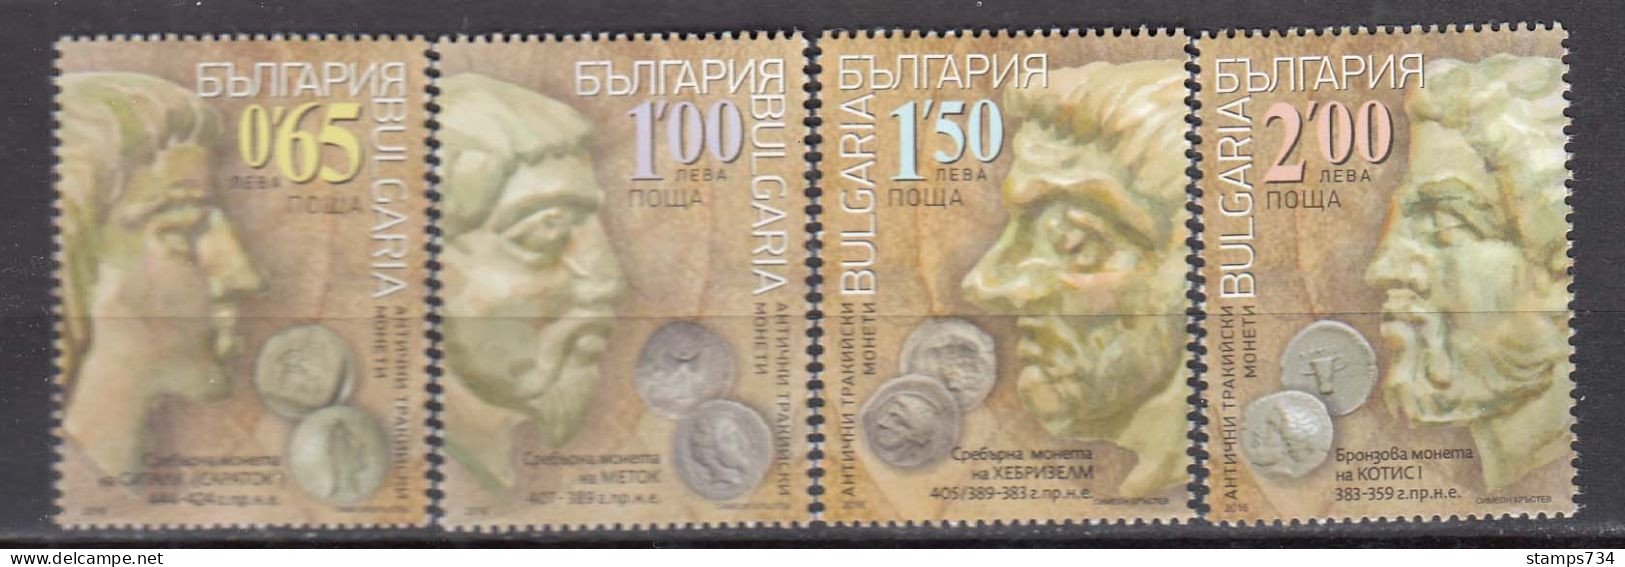 Bulgaria 2016 - Tracian Coins, Mi-Nr. 5261/64, MNH** - Unused Stamps